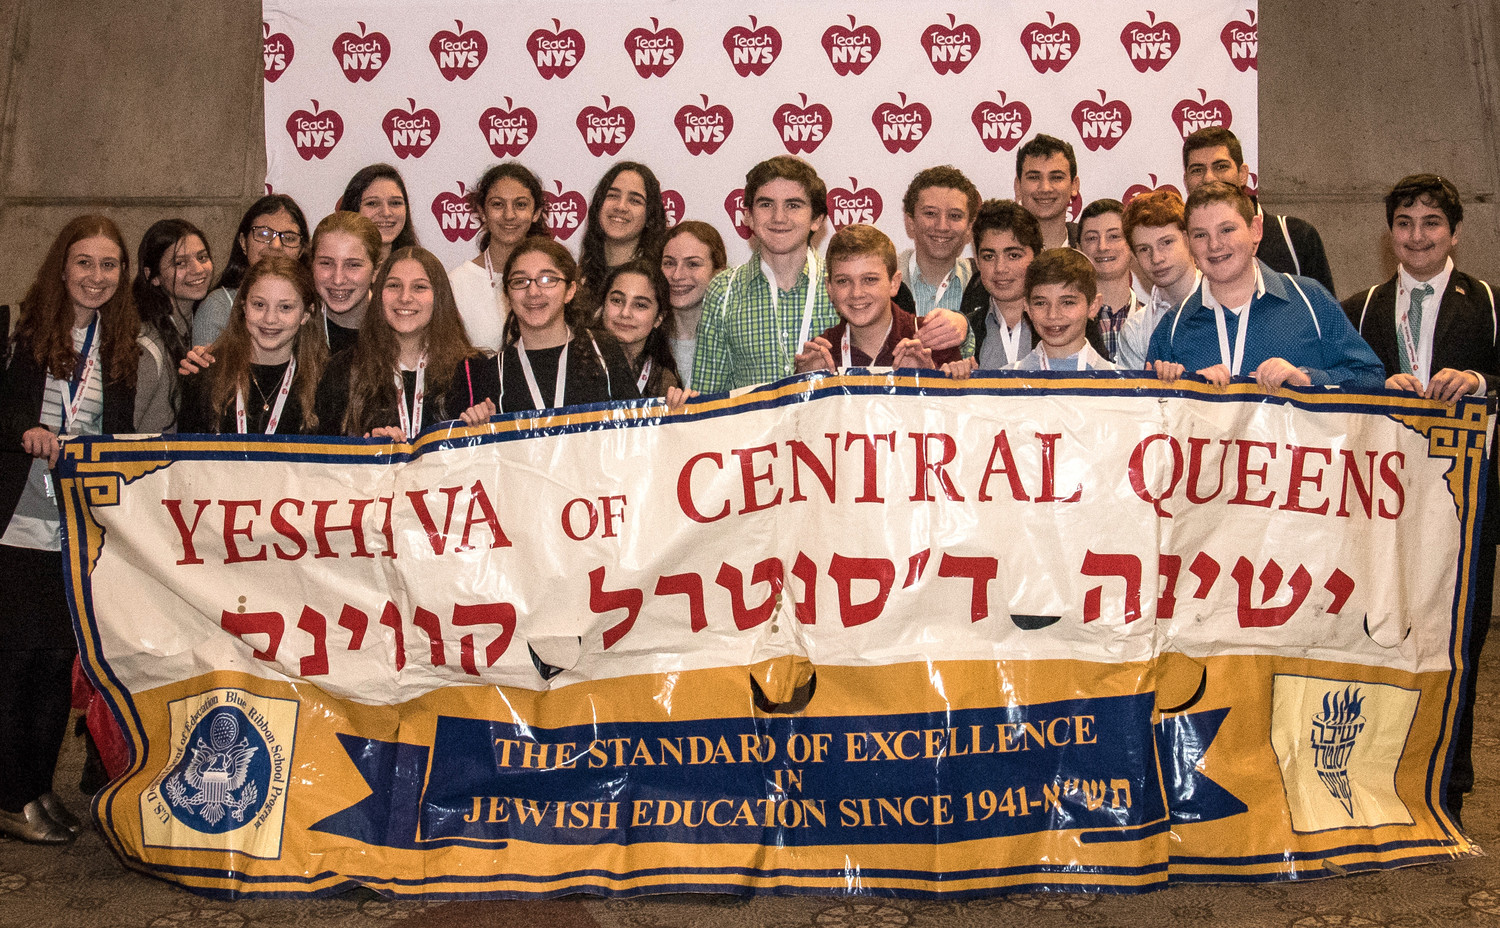 Boys and girls from the Yeshiva of Central Queens joined the OU advocacy effort.